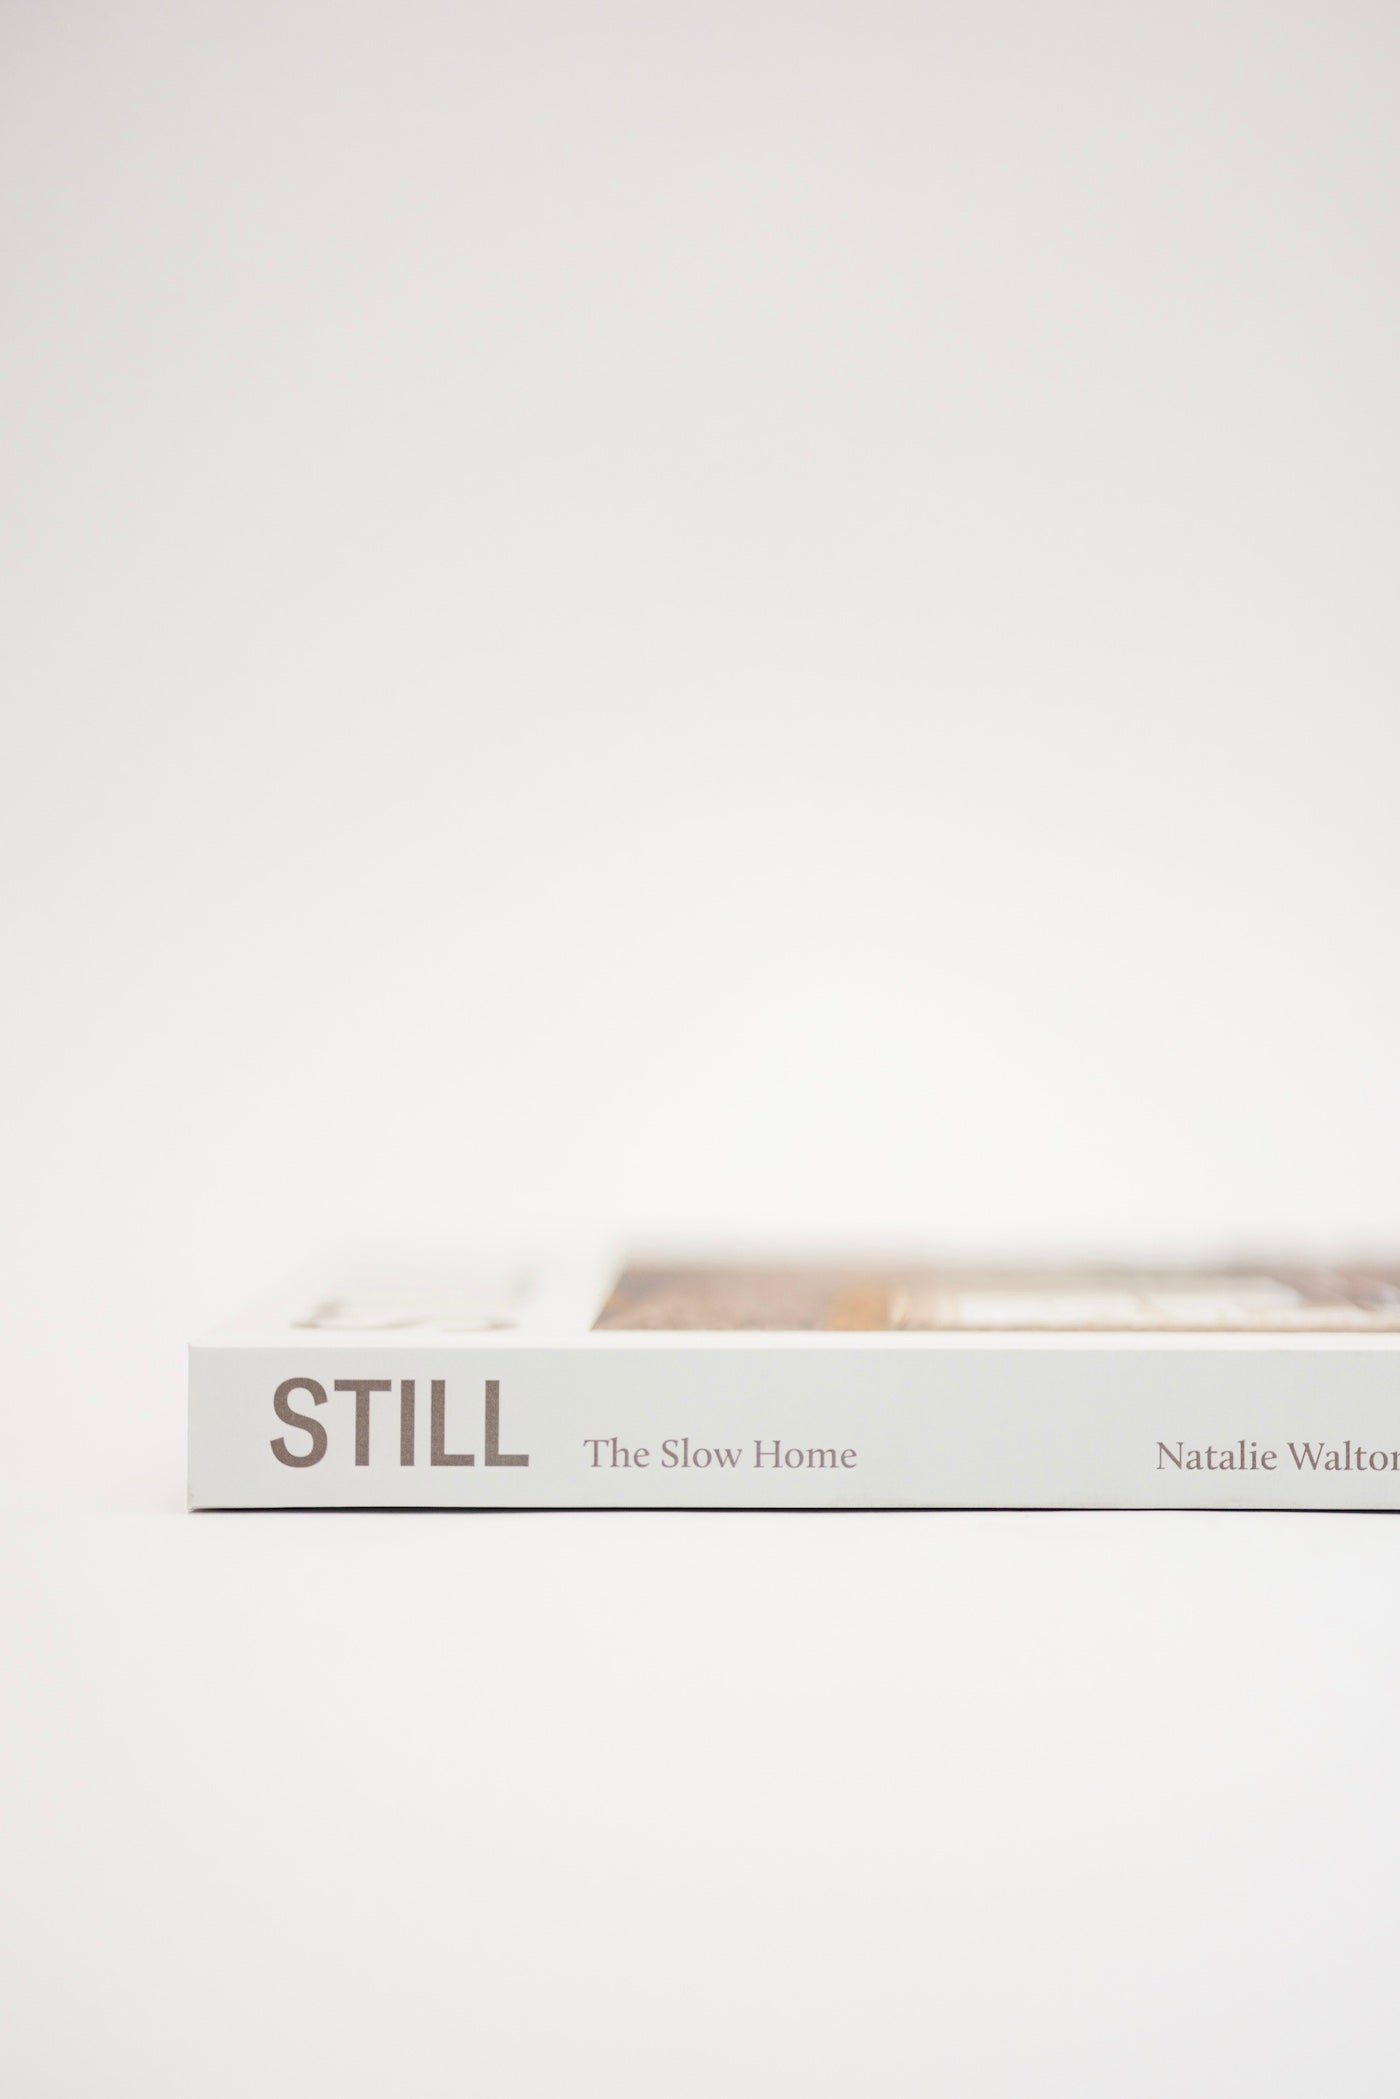 Still: The Slow Home by Natalie Walton